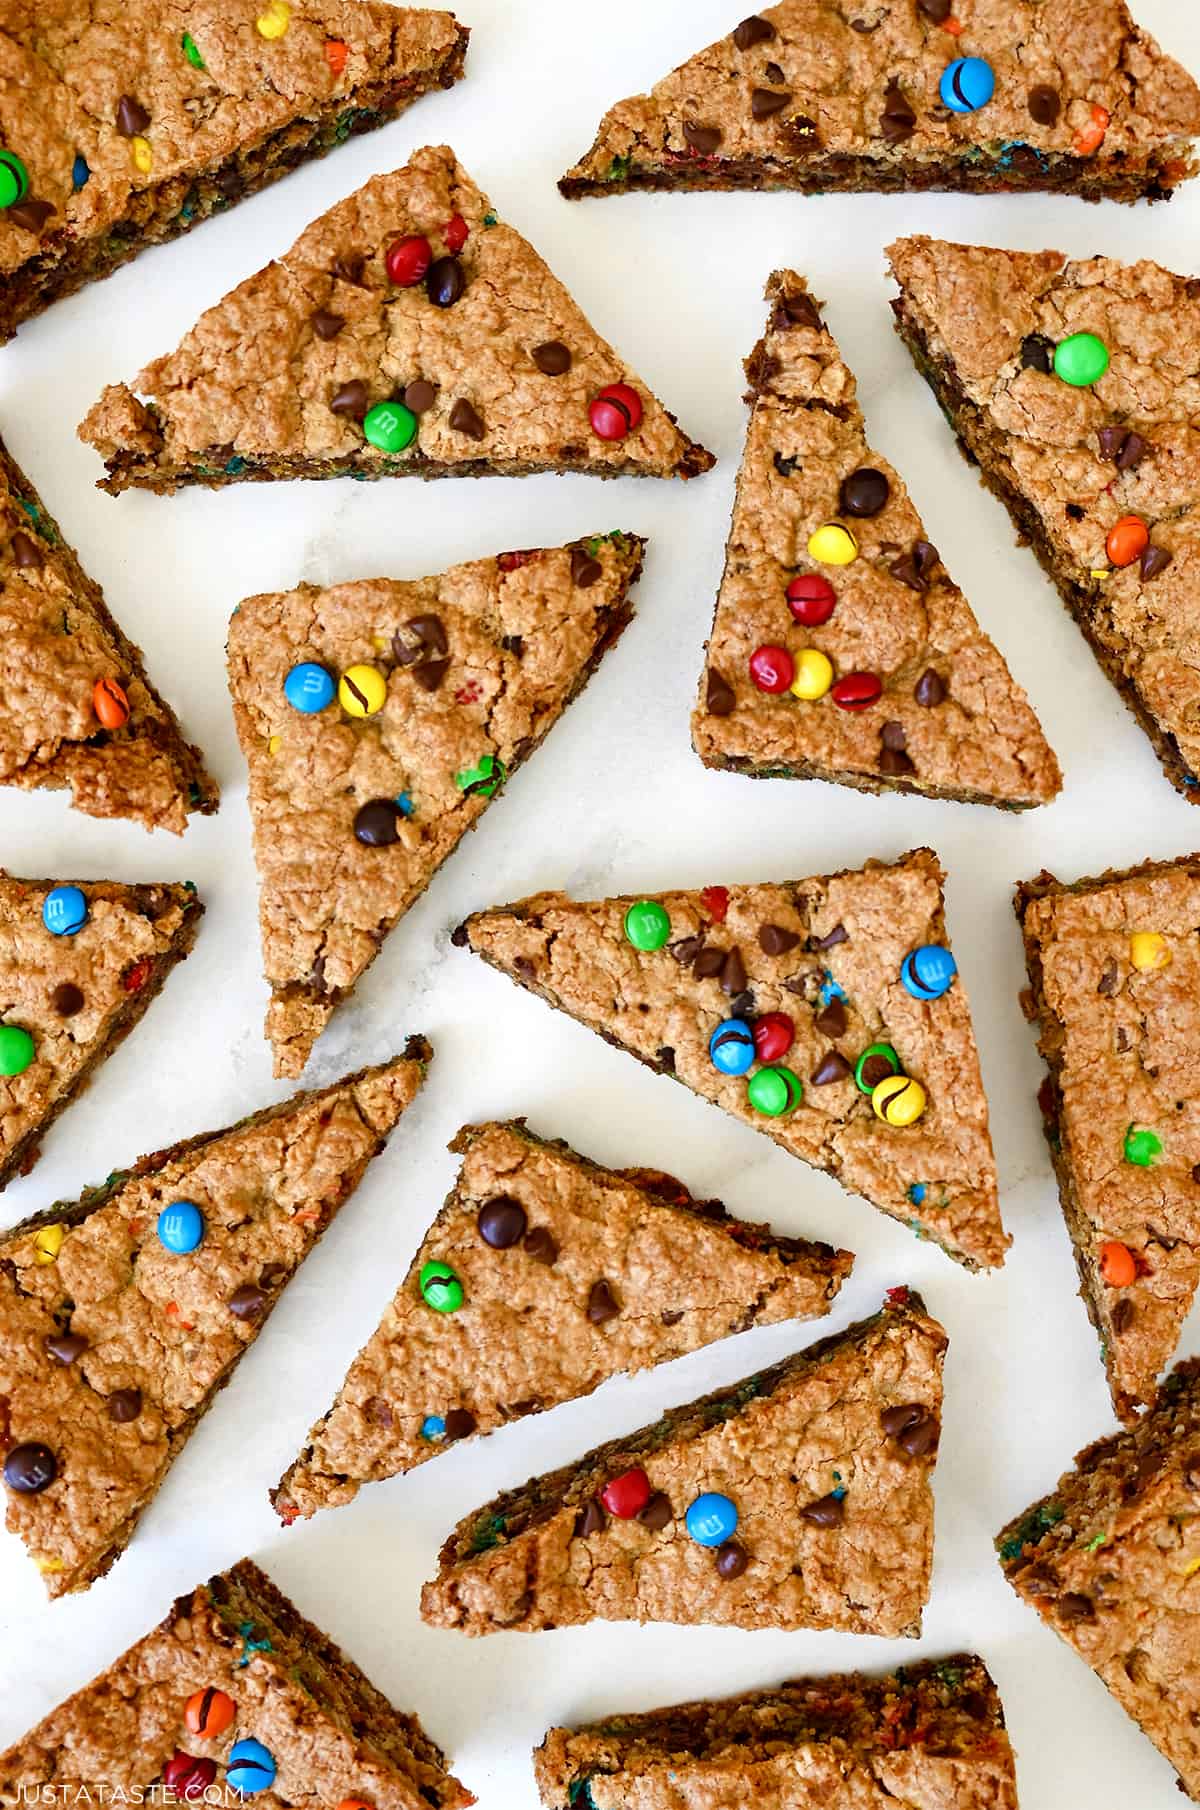 Monster cookie bars studded with M&Ms and chocolate chips cut into triangles.